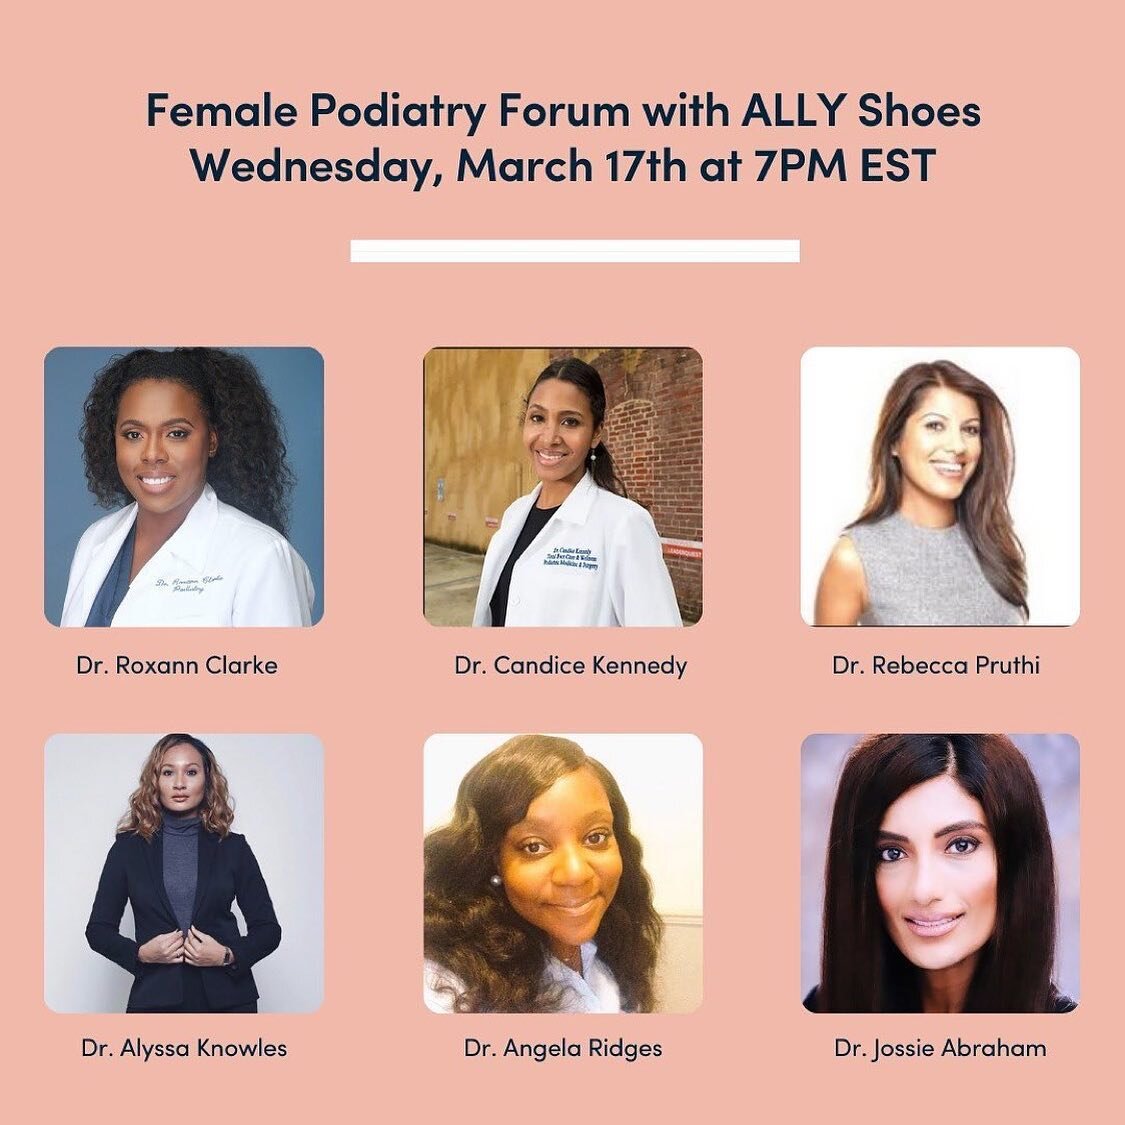 Repost from @drroxxicee7
&bull;
In celebration of Women&rsquo;s History Month, join me and this amazing panel for advice on foot health and life. We will be streaming on @allyshoes FB live, hope to see you there!